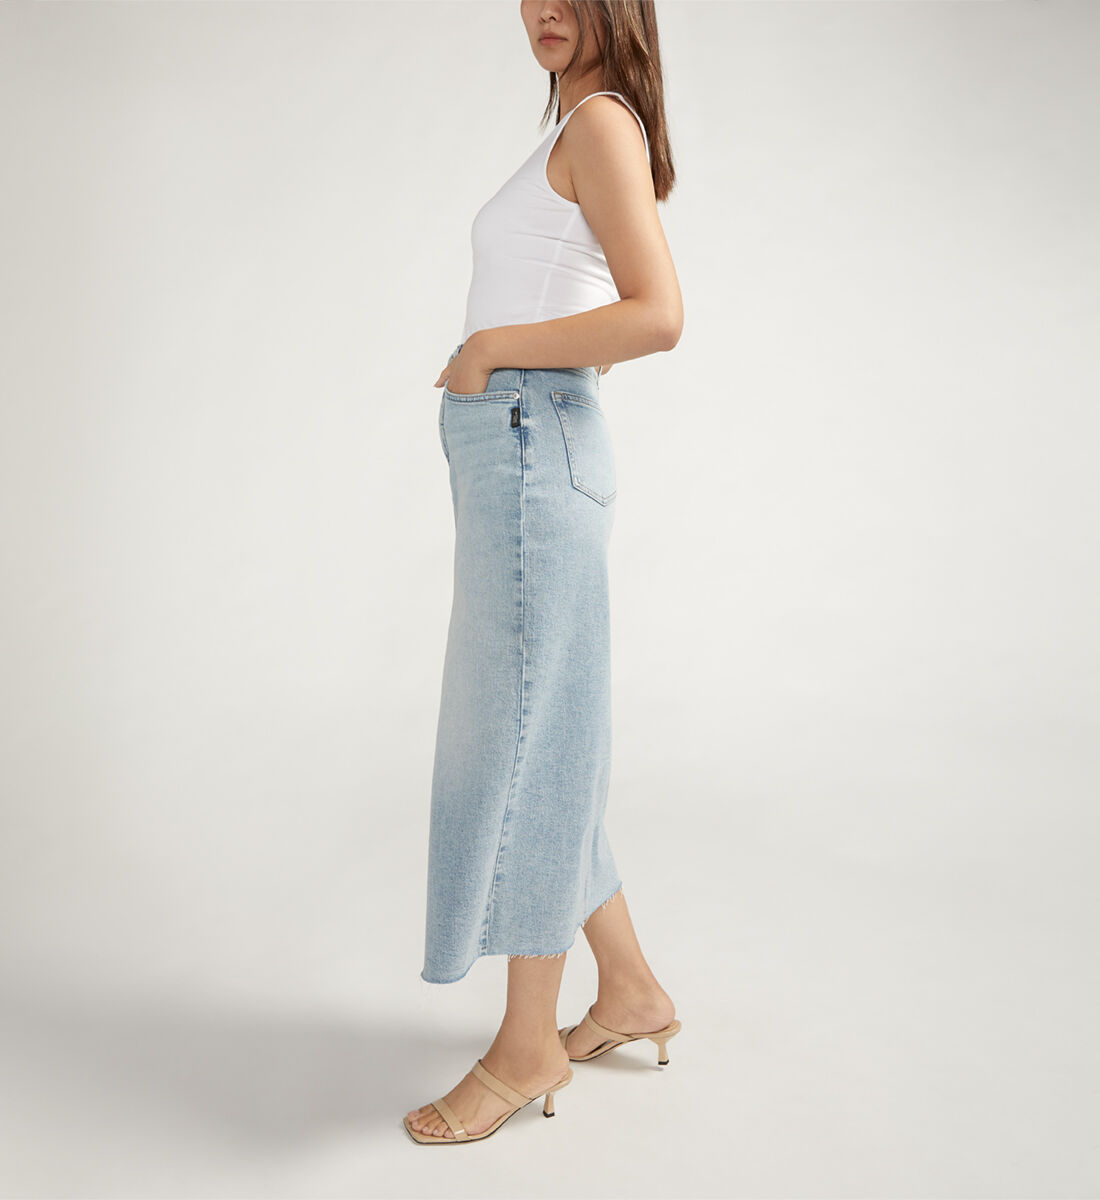 Buy Front-Slit Midi Jean Skirt for USD 68.00 | Silver Jeans US New